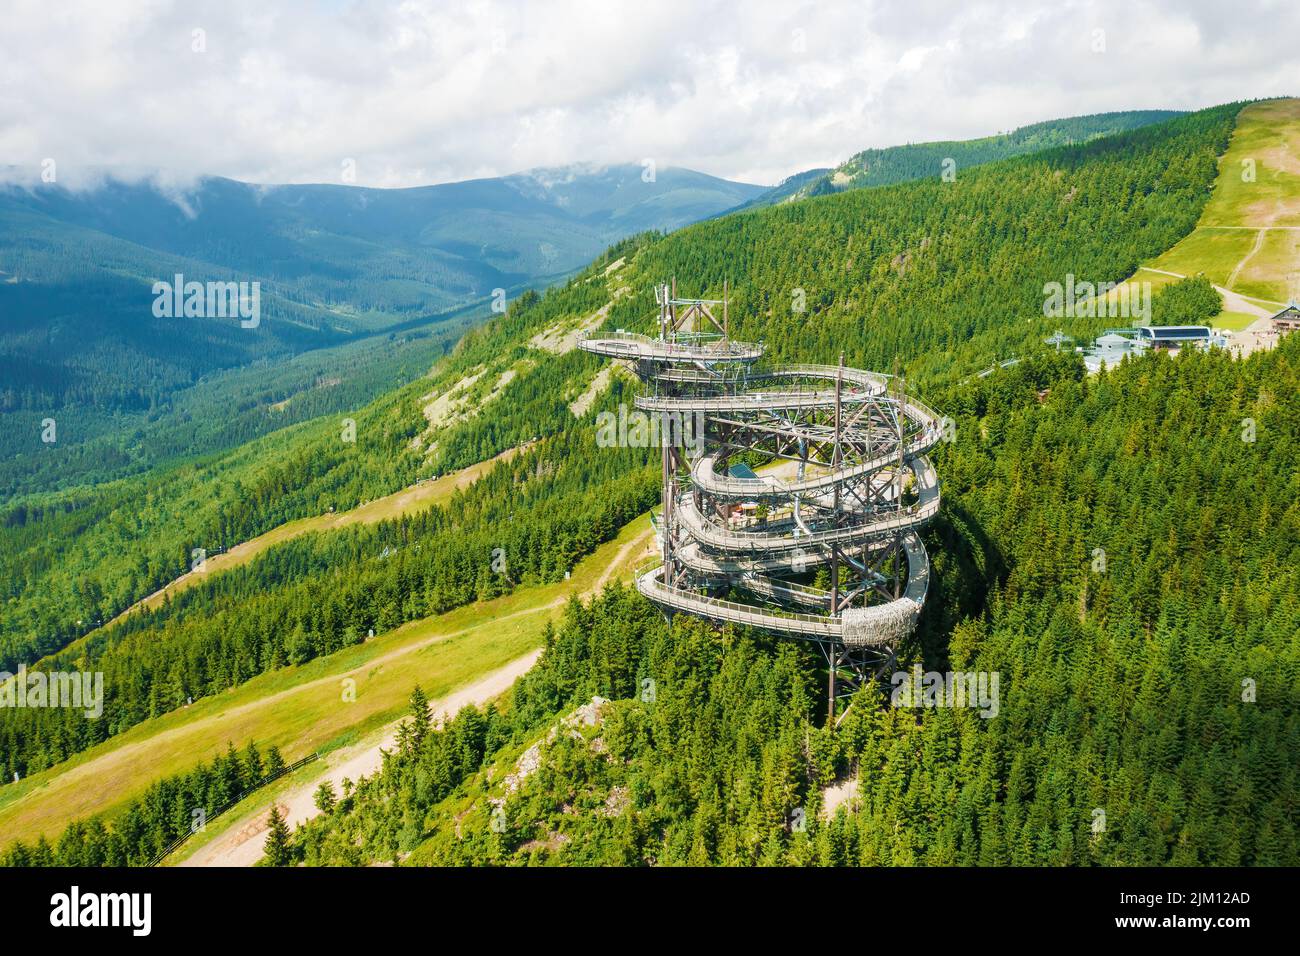 Sky walk observation tower in the forest between mountain hills near Sky Bridge 721 in a sunny summer day, Dolni Morava, Czech Republic.  Stock Photo